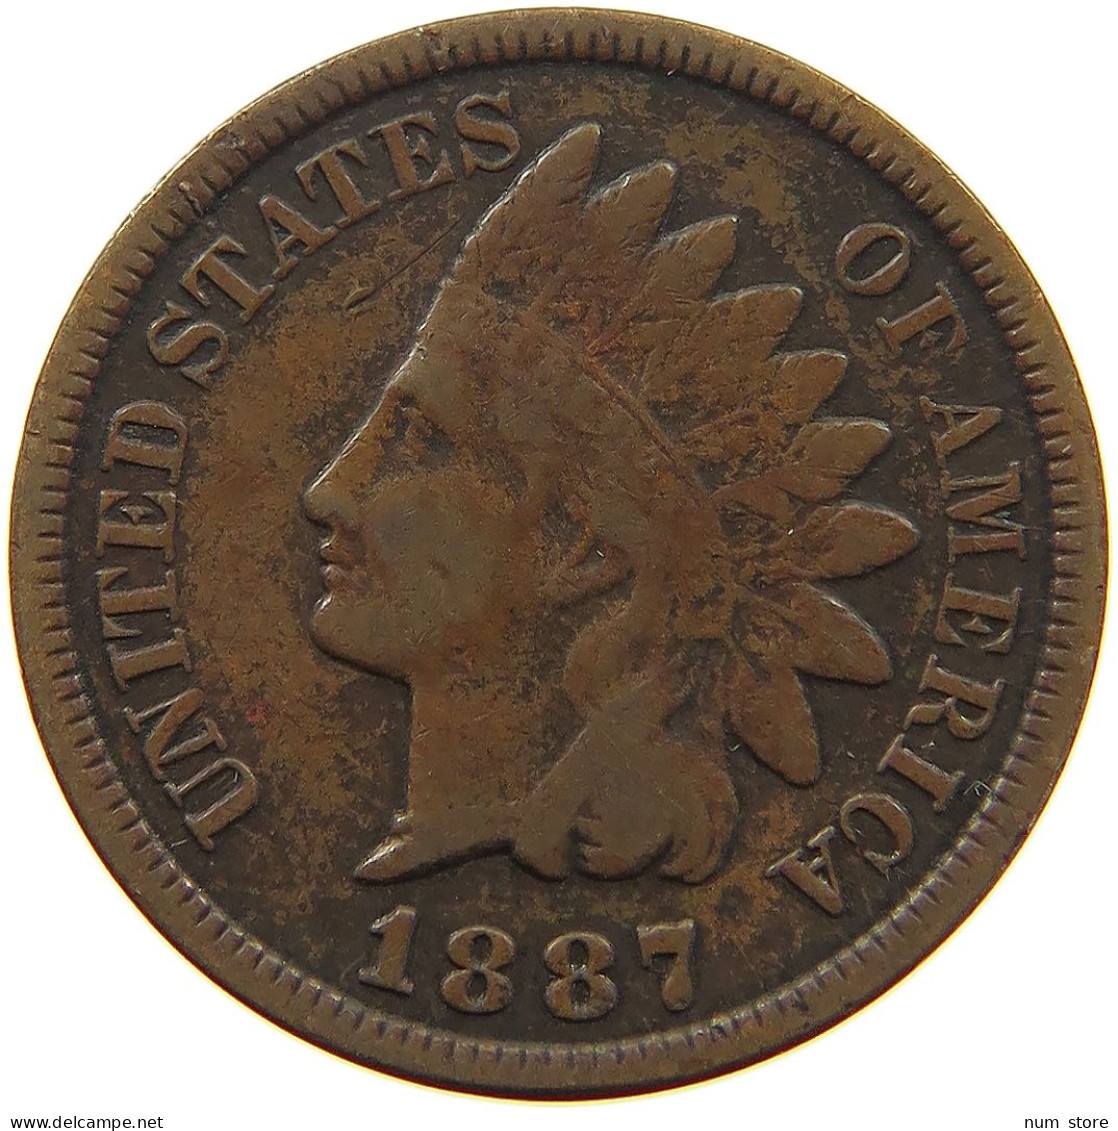 UNITED STATES OF AMERICA CENT 1887 INDIAN HEAD #a013 0369 - 1859-1909: Indian Head